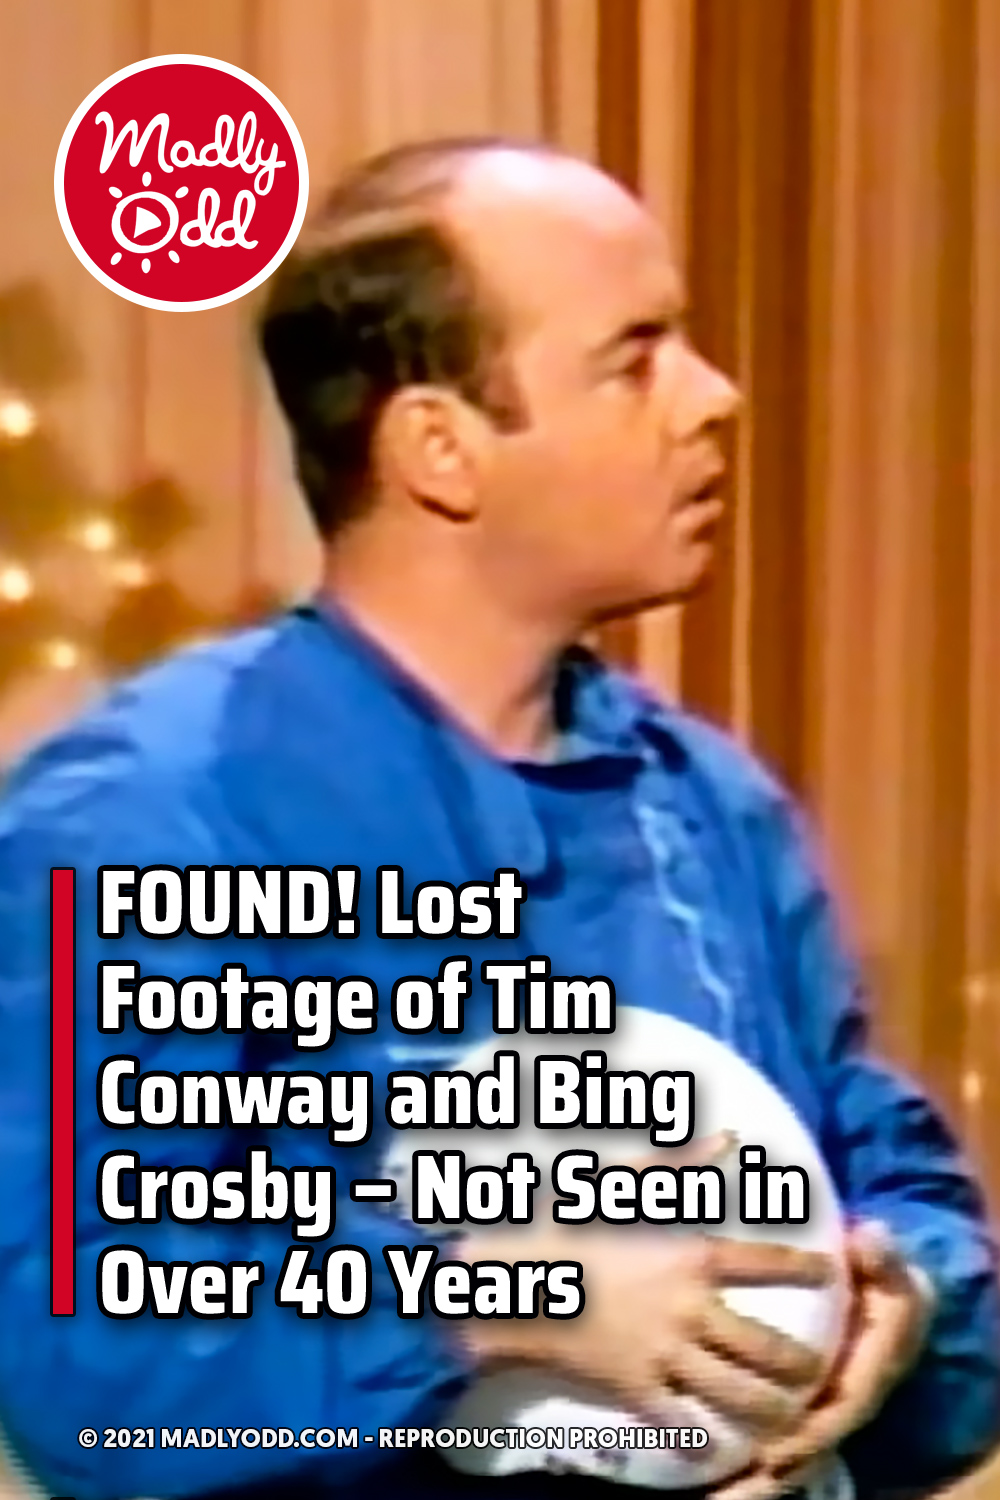 FOUND! Lost Footage of Tim Conway and Bing Crosby – Not Seen in Over 40 Years